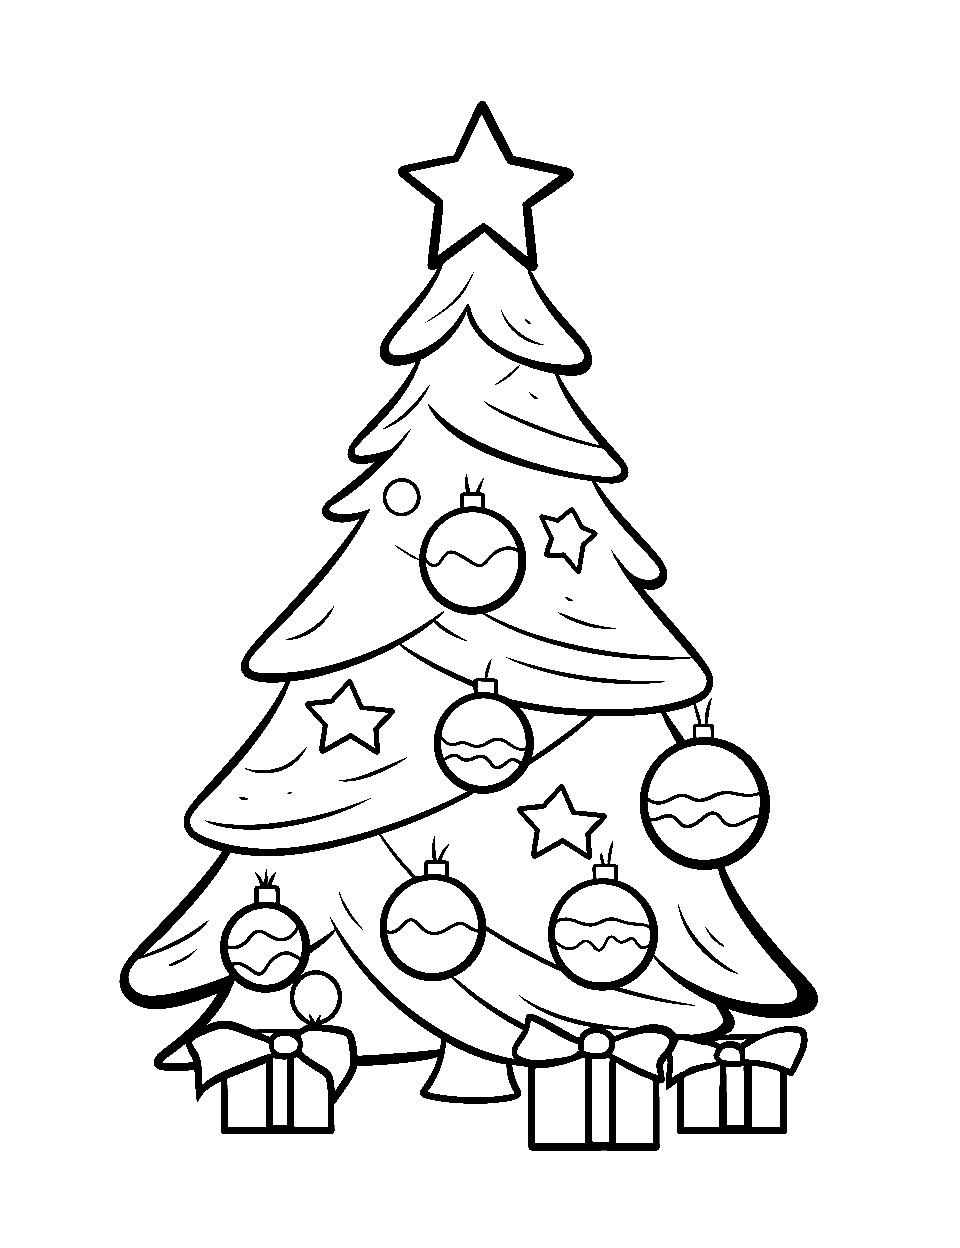 Preschool Christmas Tree Fun Coloring Page - A charming Christmas tree with large, easy-to-color ornaments and a happy star suitable for preschoolers.